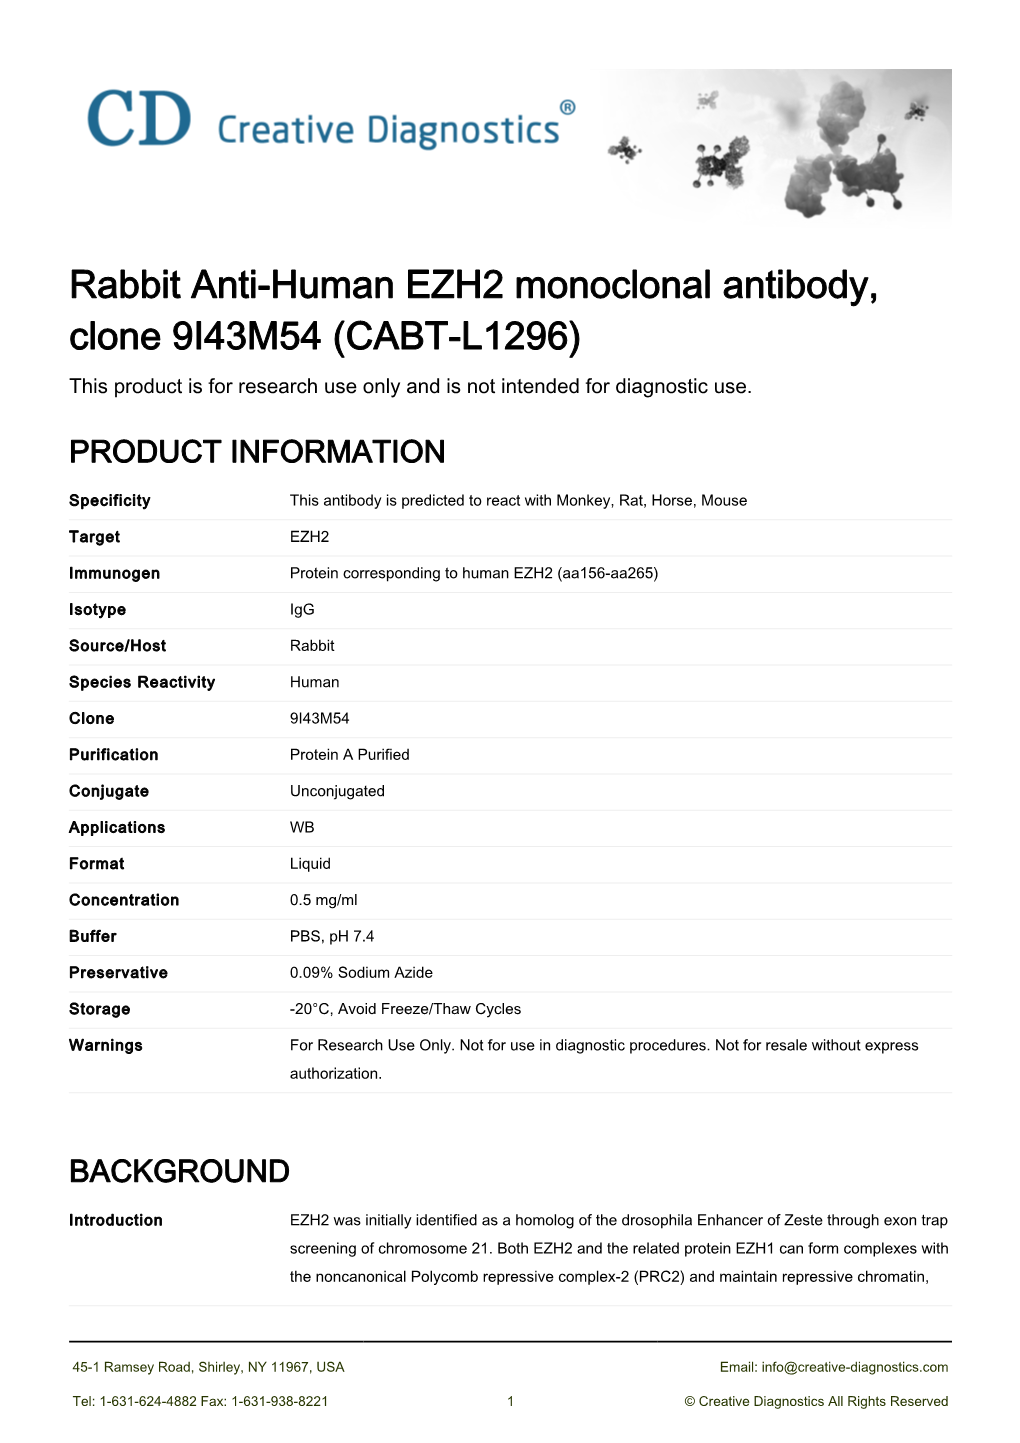 Rabbit Anti-Human EZH2 Monoclonal Antibody, Clone 9I43M54 (CABT-L1296) This Product Is for Research Use Only and Is Not Intended for Diagnostic Use